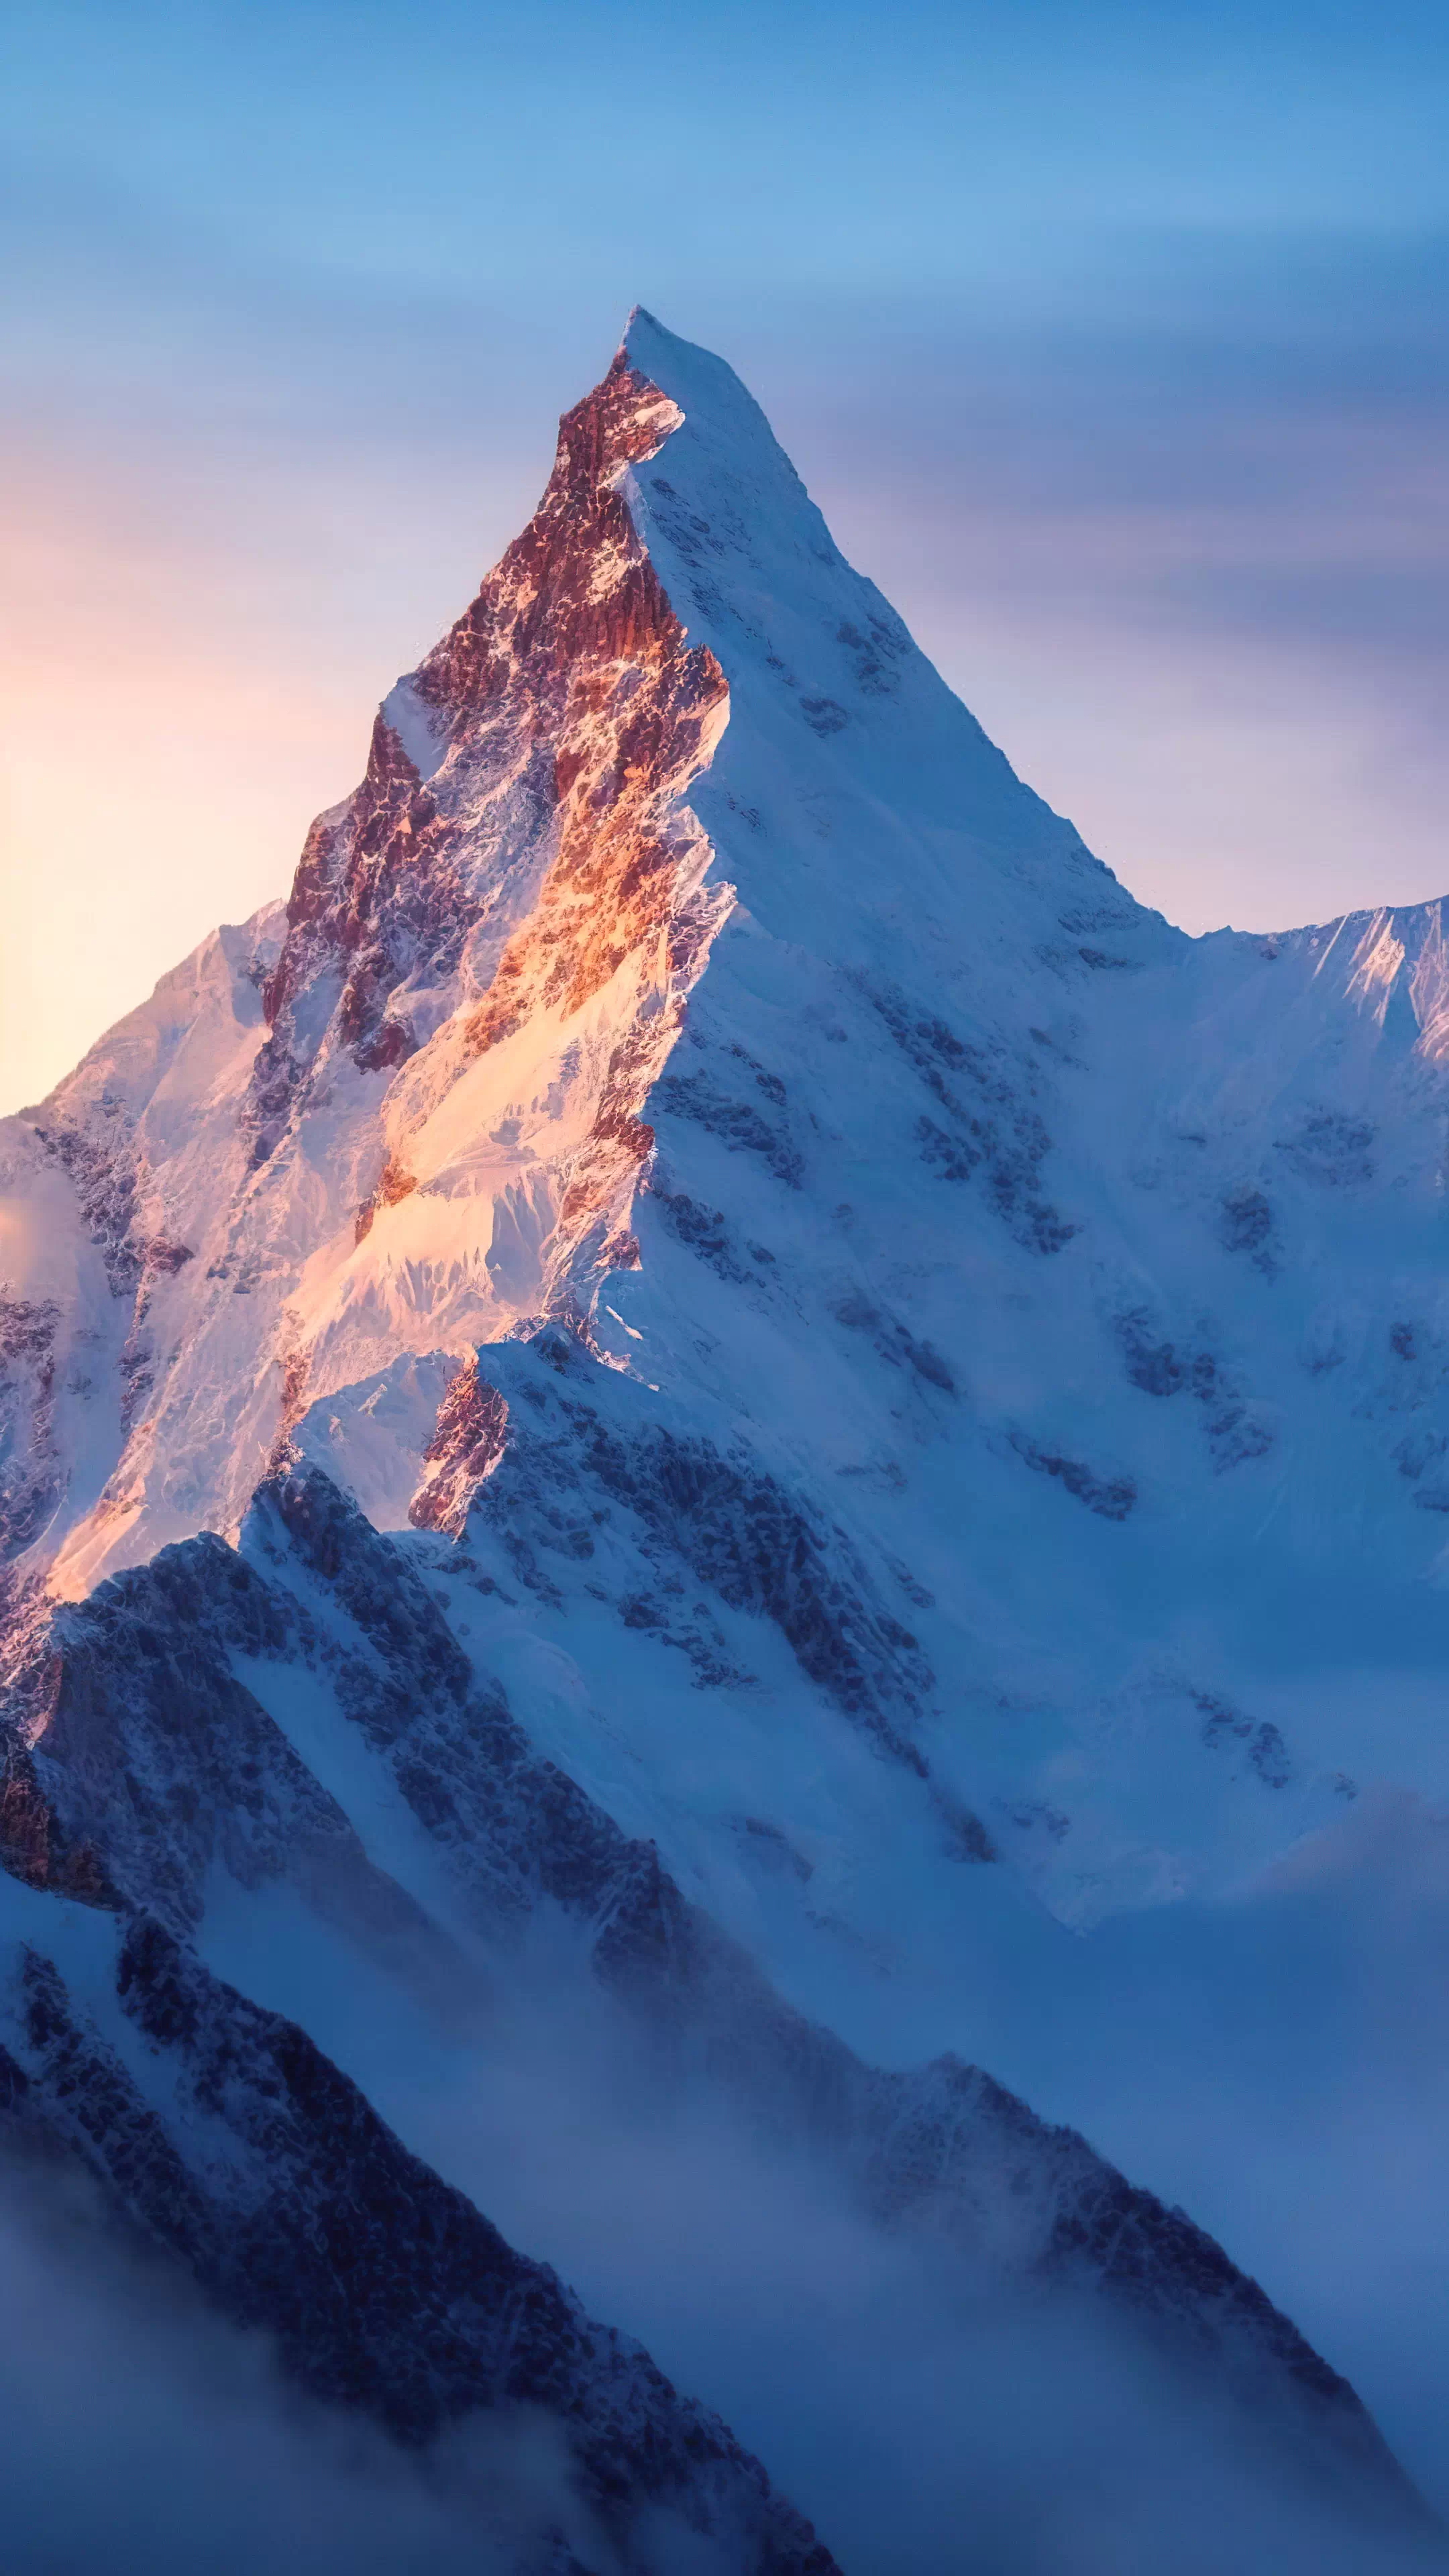 Experience the beauty of nature with our best nature wallpaper, featuring a captivating mountain bathed in the soft dawn light against a tranquil blue sky, bringing serenity to your digital world.